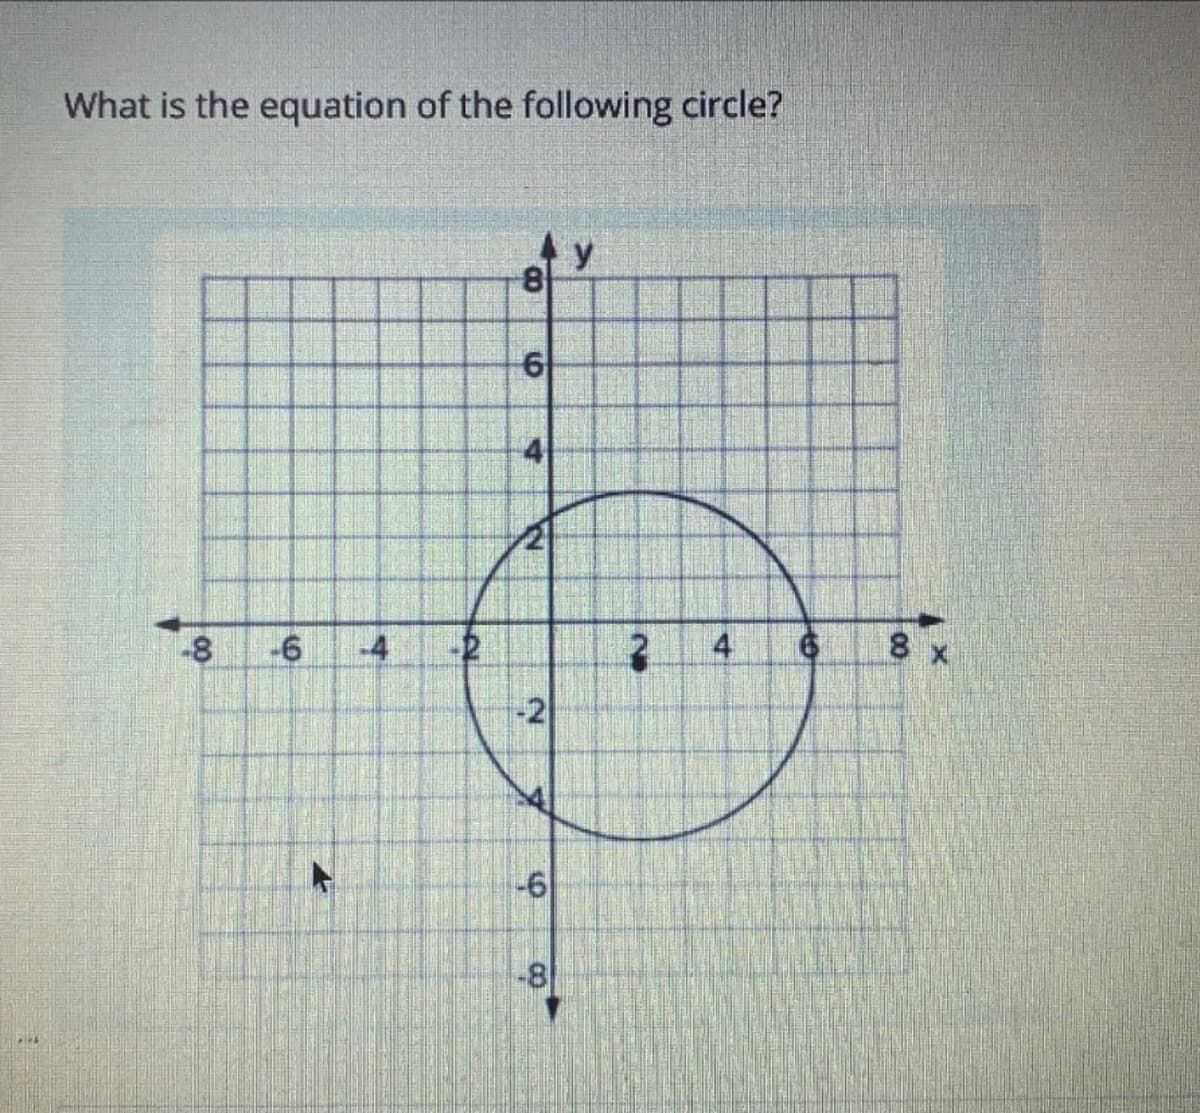 What is the equation of the following circle?
y
-8
-6
-4
4
8 x
-2
-6
-81
